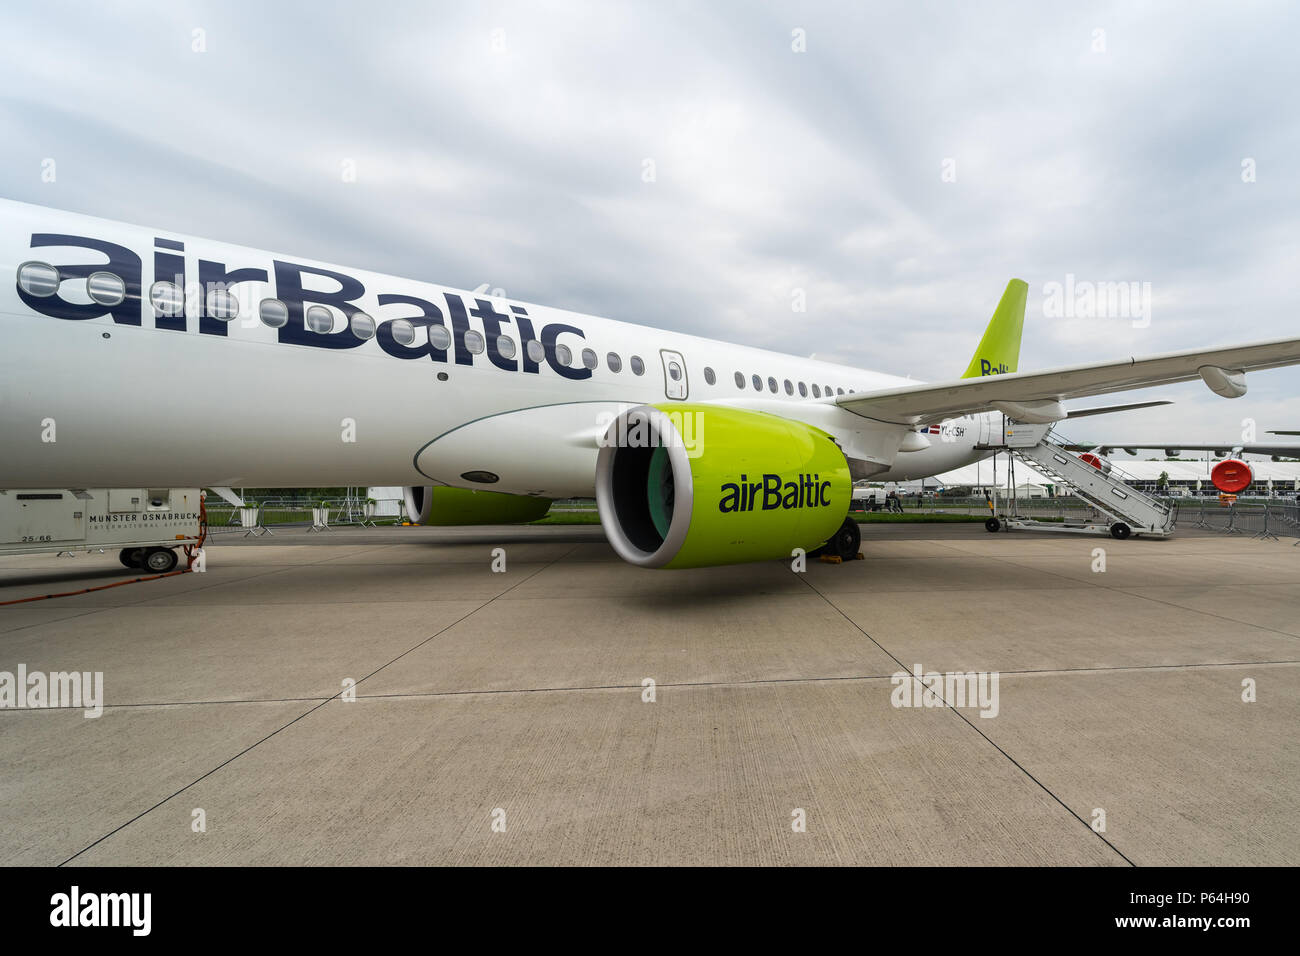 BERLIN, GERMANY - APRIL 25, 2018: Fragment of the narrow-body jet airliner Bombardier CS300, by AirBaltic. Exhibition ILA Berlin Air Show 2018. Stock Photo